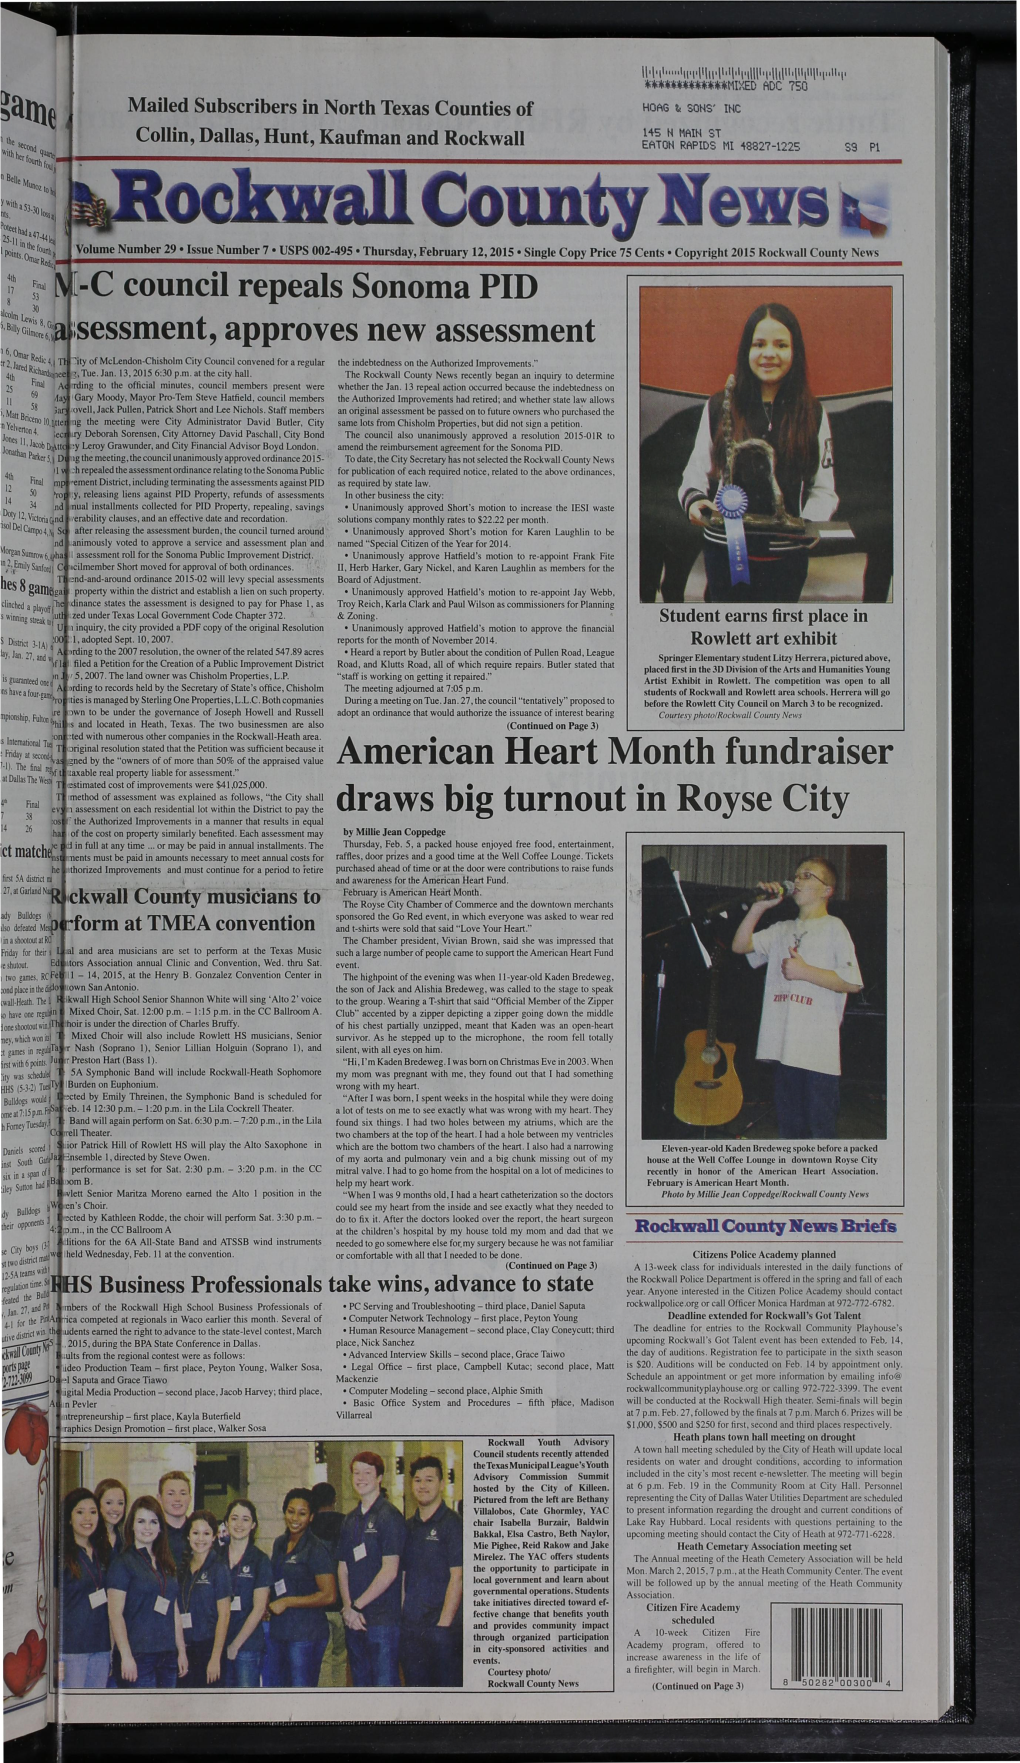 C-C Council Repeals Sonoma PID Sessment, Approves New Assessment American Heart Month Fundraiser Draws Big Turnout in Royse City